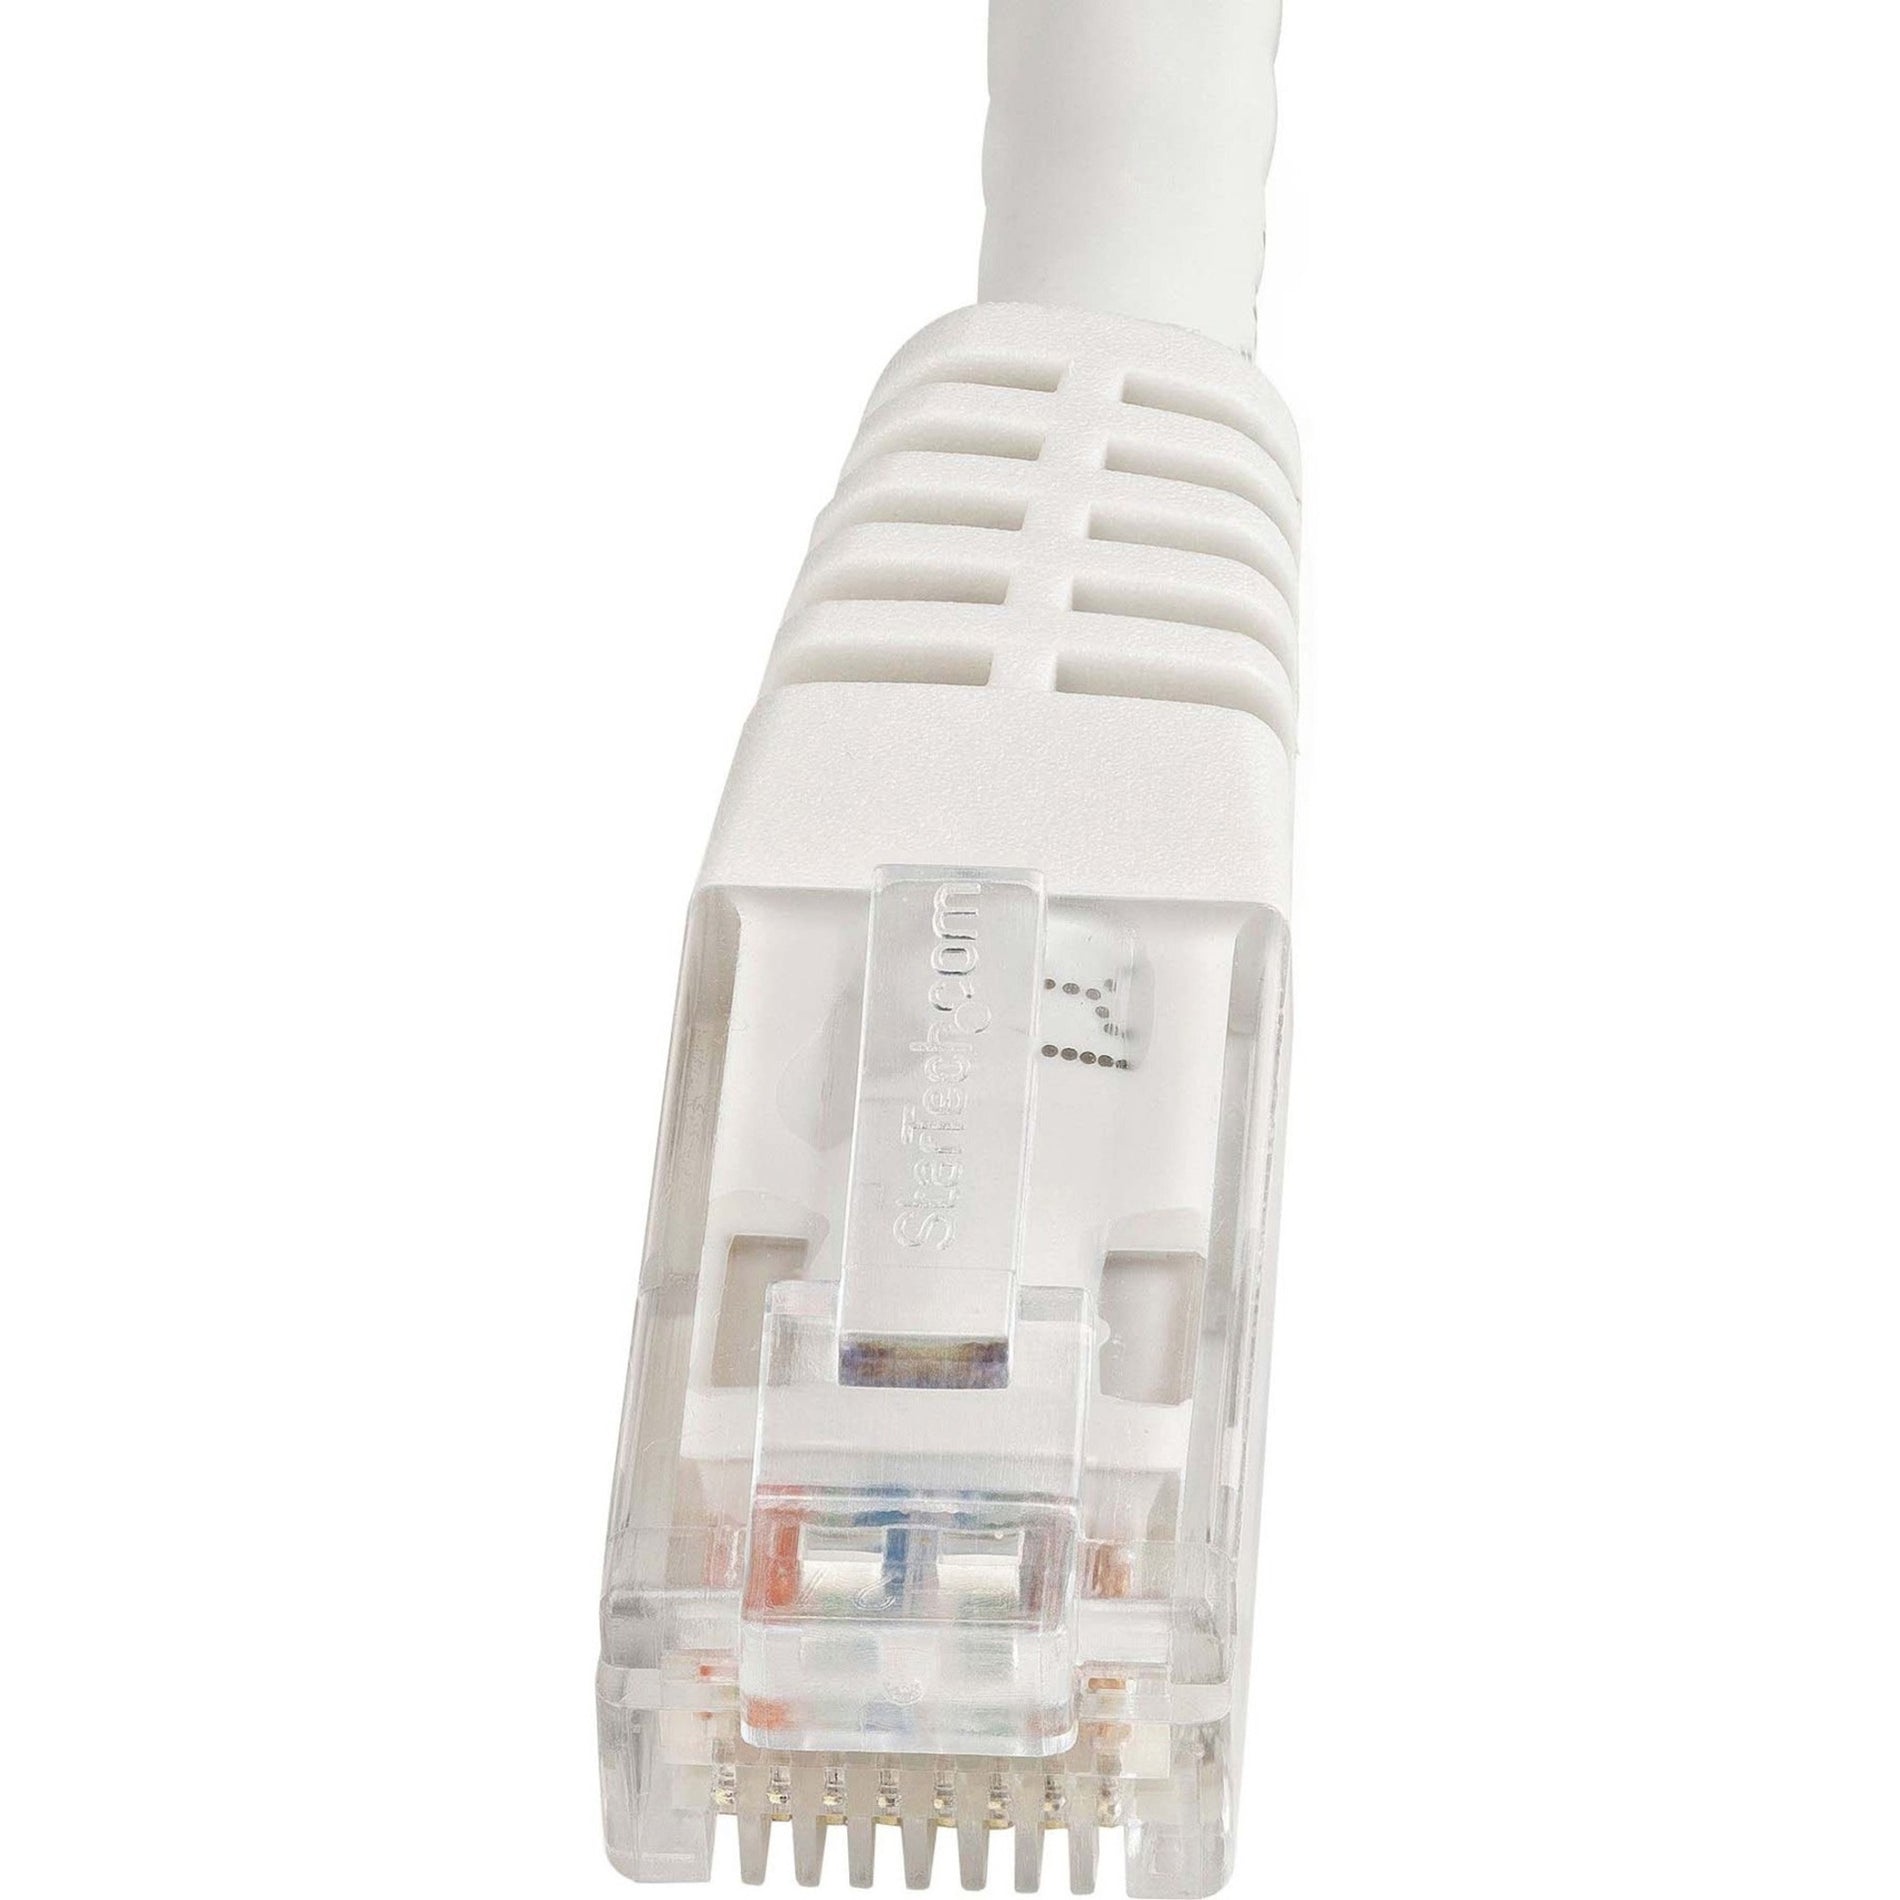 StarTech.com C6PATCH10WH 10ft white Molded Cat6 UTP Patch Cable ETL Verified, 10 Gbit/s Data Transfer Rate, PoE+, Snagless Boot